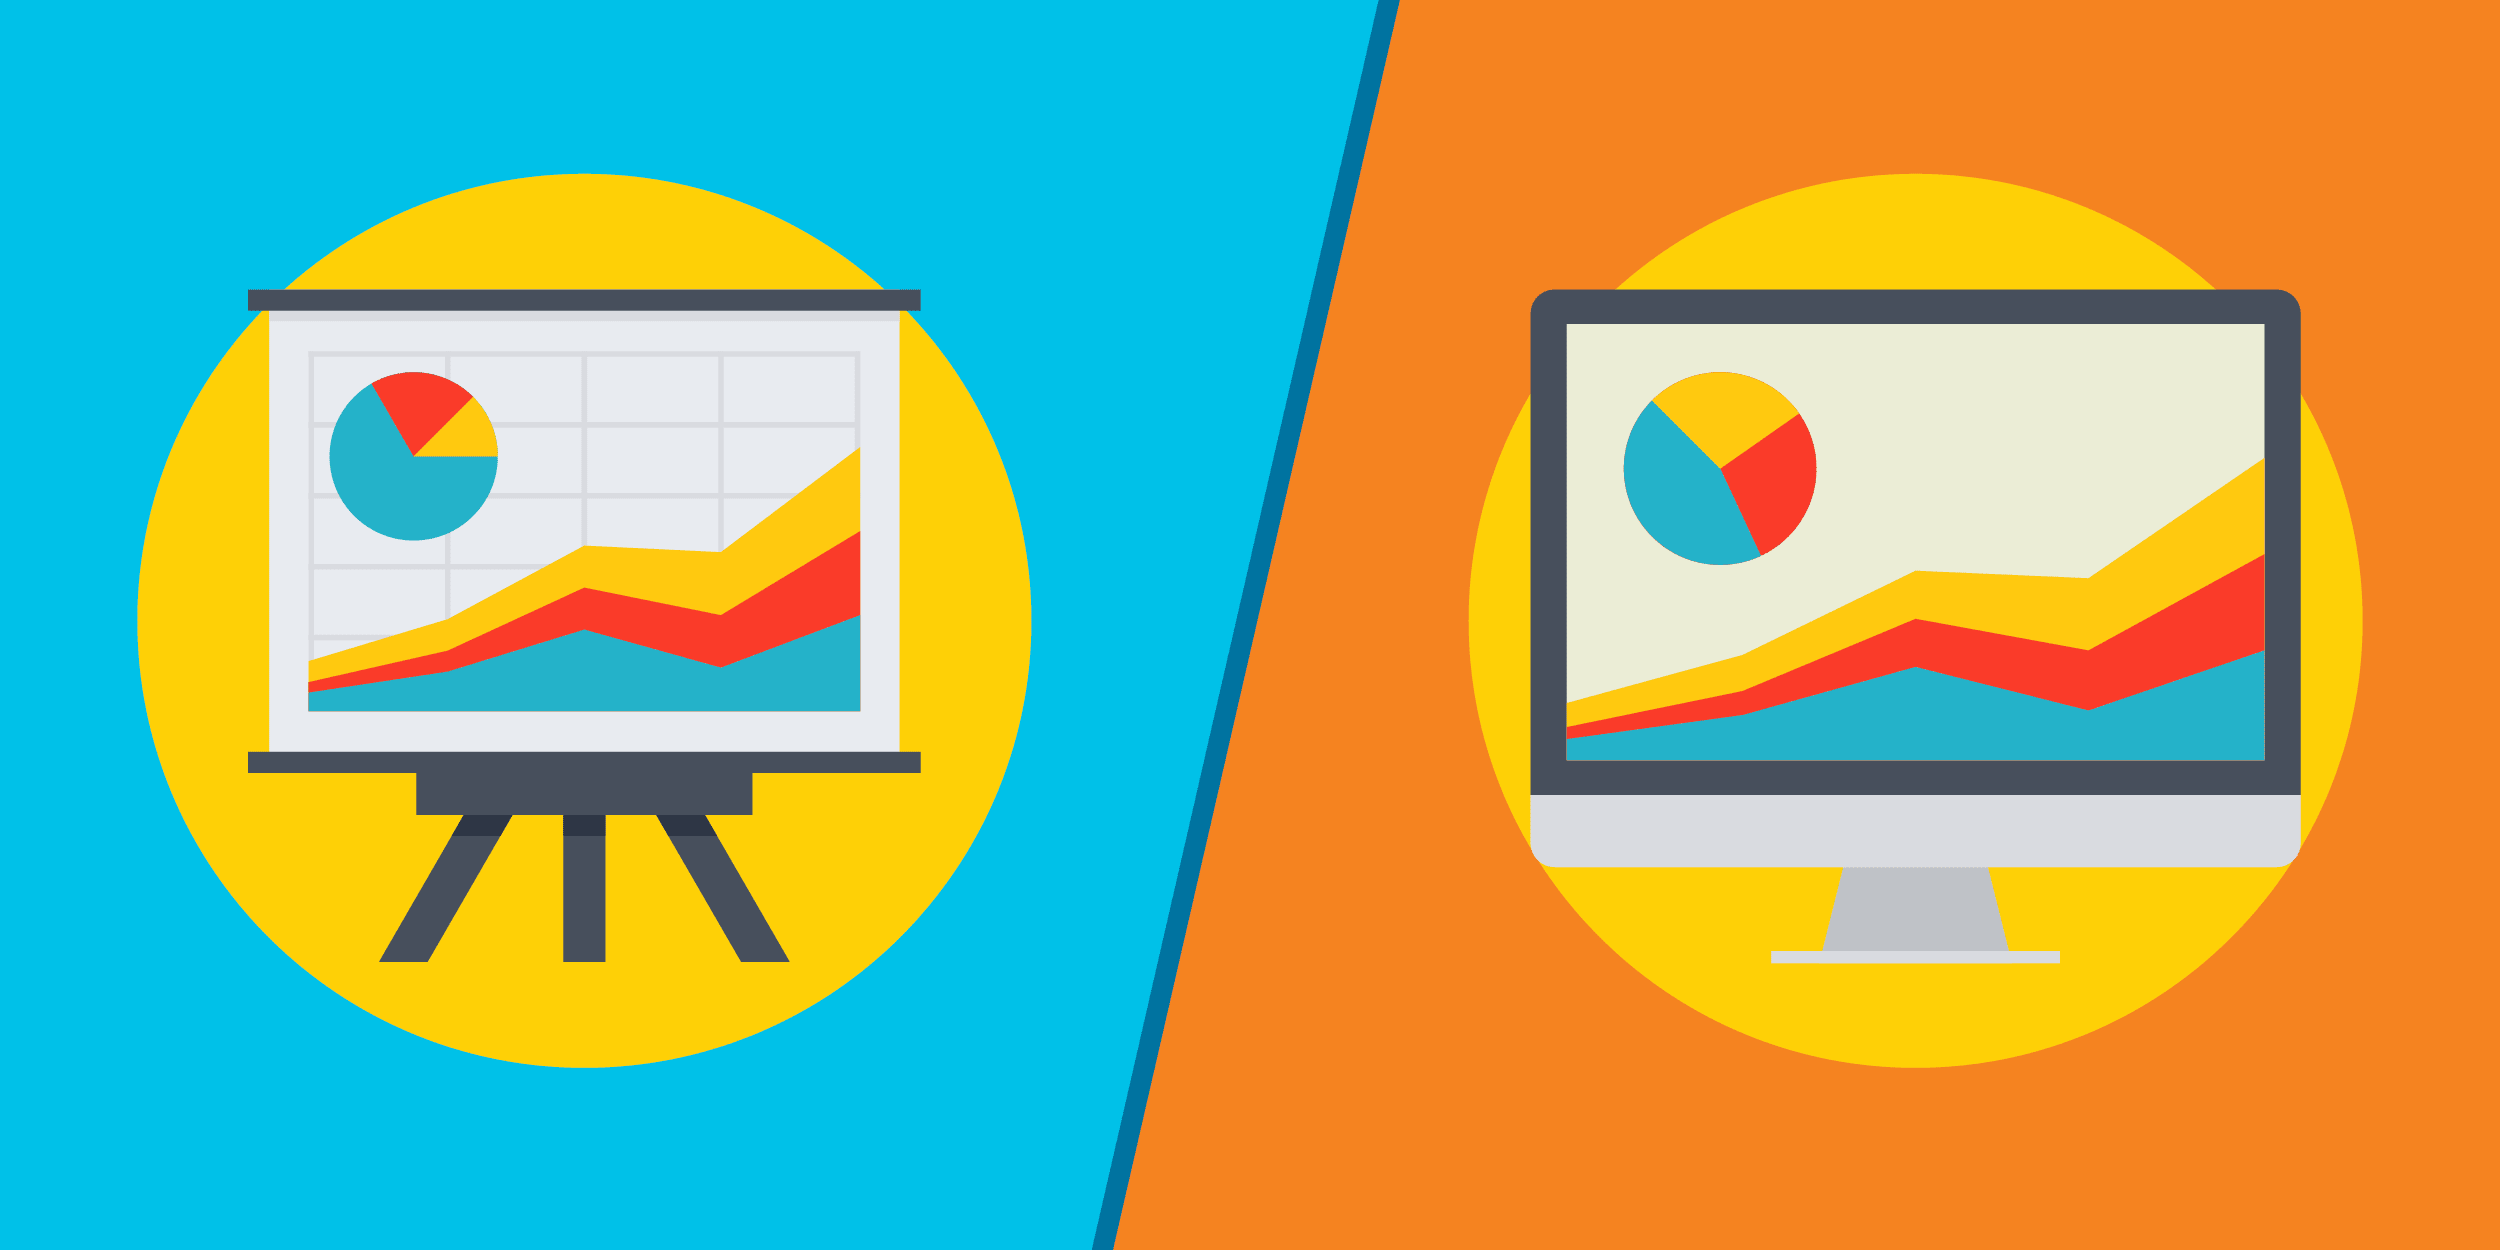 illustration of pie and line charts on an easel compared to financial charts on a computer, representing the need for new nonprofit accounting or financial management software